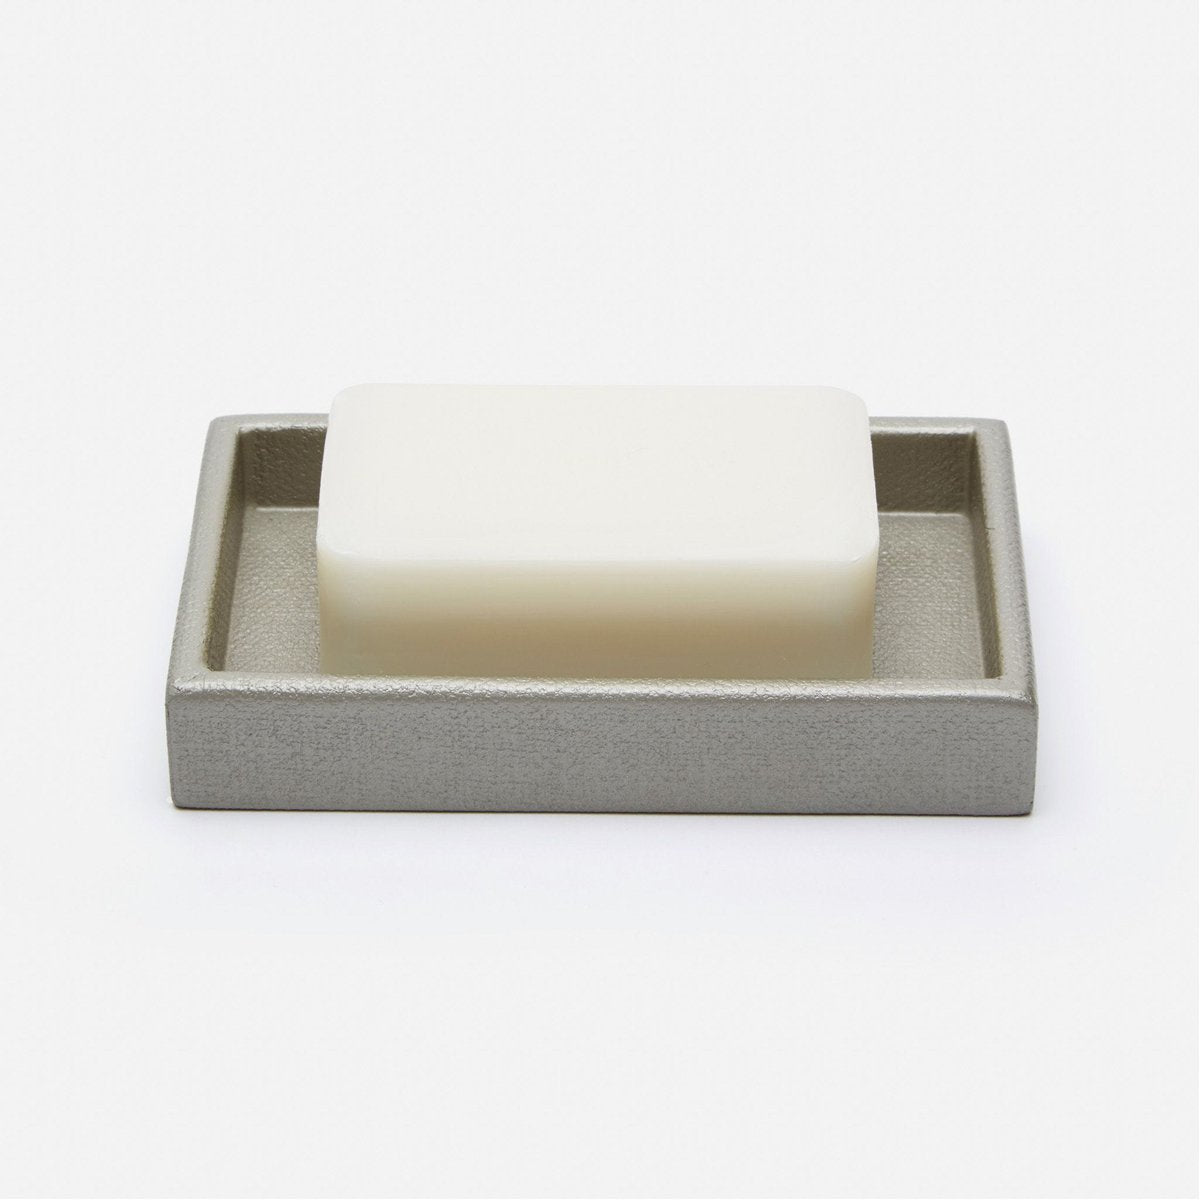 Pigeon and Poodle Dannes Rectangular Soap Dish, Straight